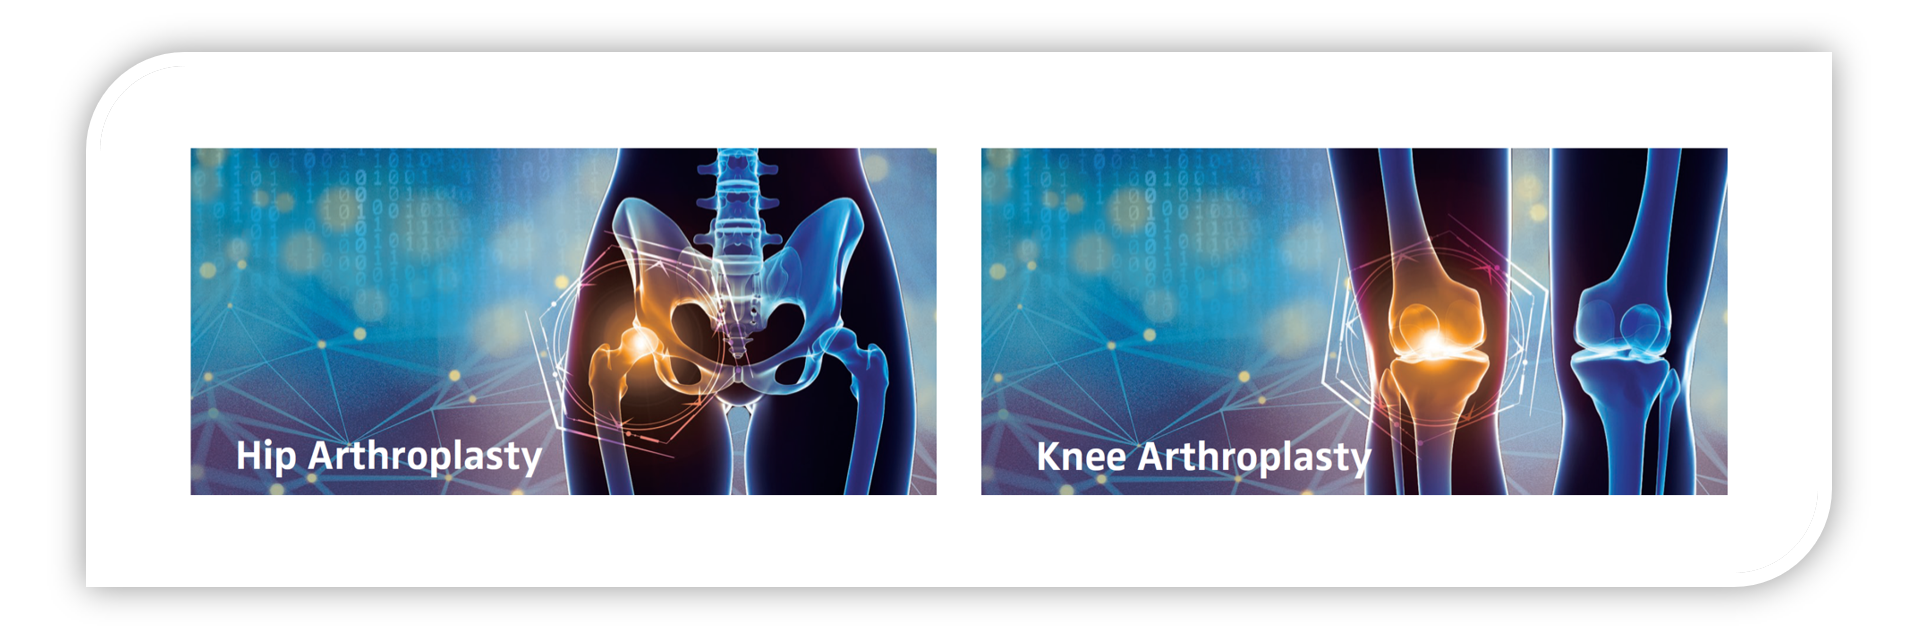 Hip and Knee Arthroplasty Images from AJRR 2020 Annual Report